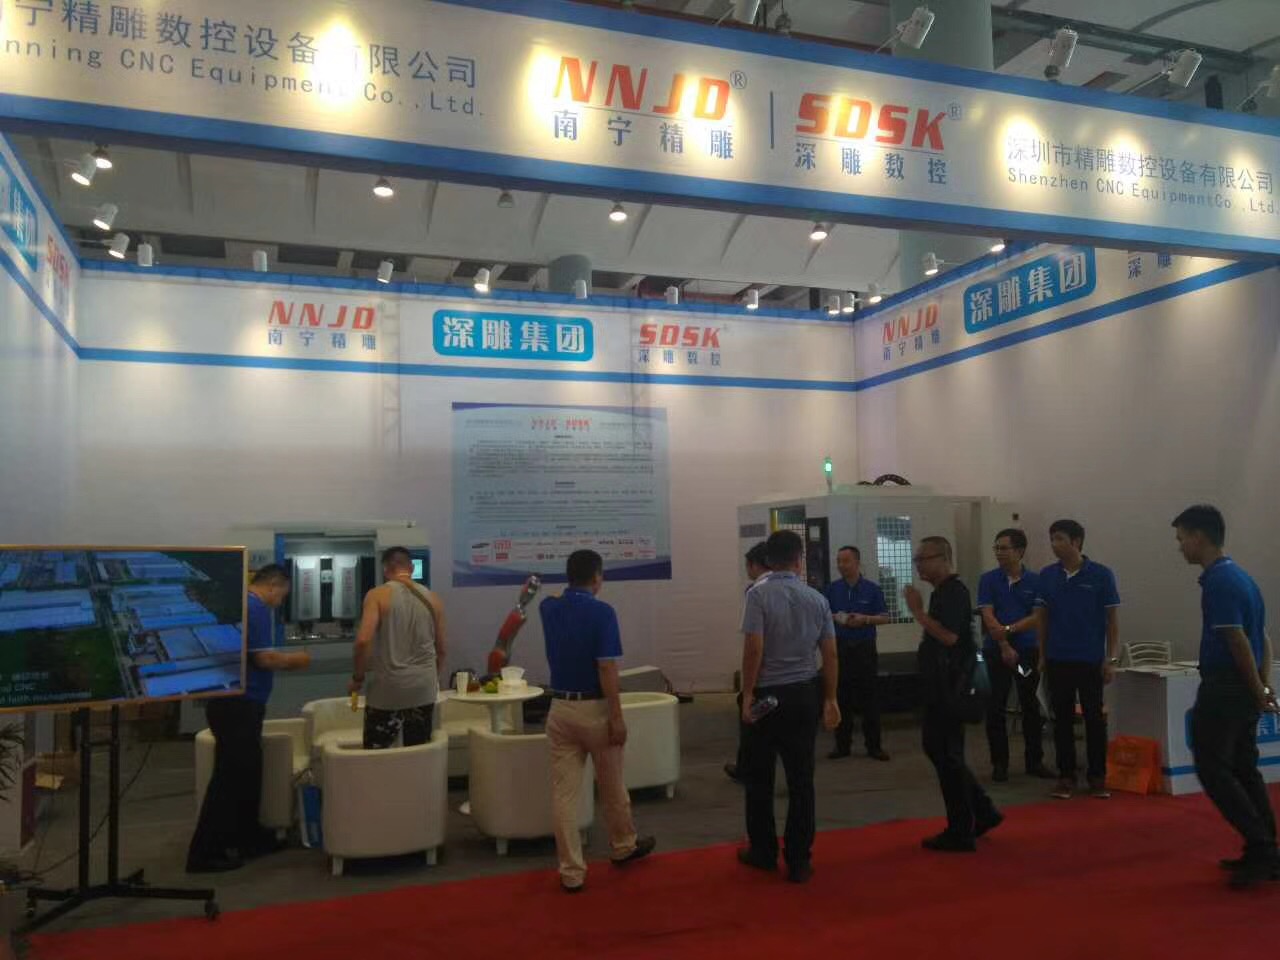 Shenzhen Jingdiao participated in the ASEAN Expo and obtained 20 orders on-site. The precision of drilling and tapping machine processing received high customer satisfaction from Shanghai customers on